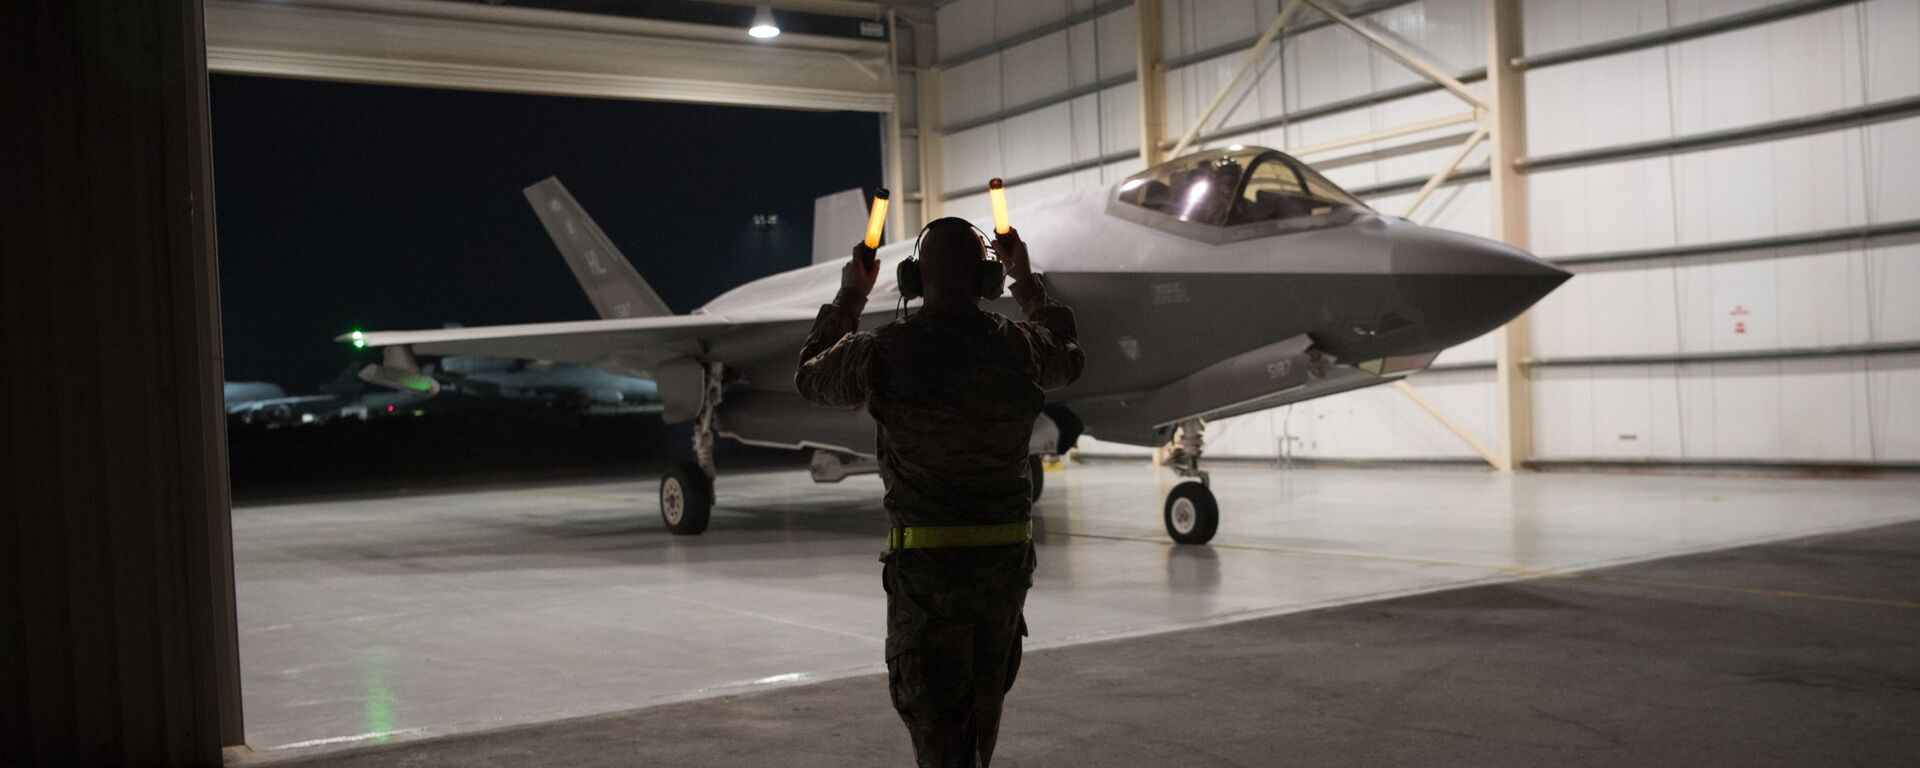 In this Sept. 10, 2019, photo released by the U.S. Air Force, an F-35A Lightning II fighter jet is directed out of a hangar at Al-Dhafra Air Base in the United Arab Emirates. - Sputnik International, 1920, 18.09.2023